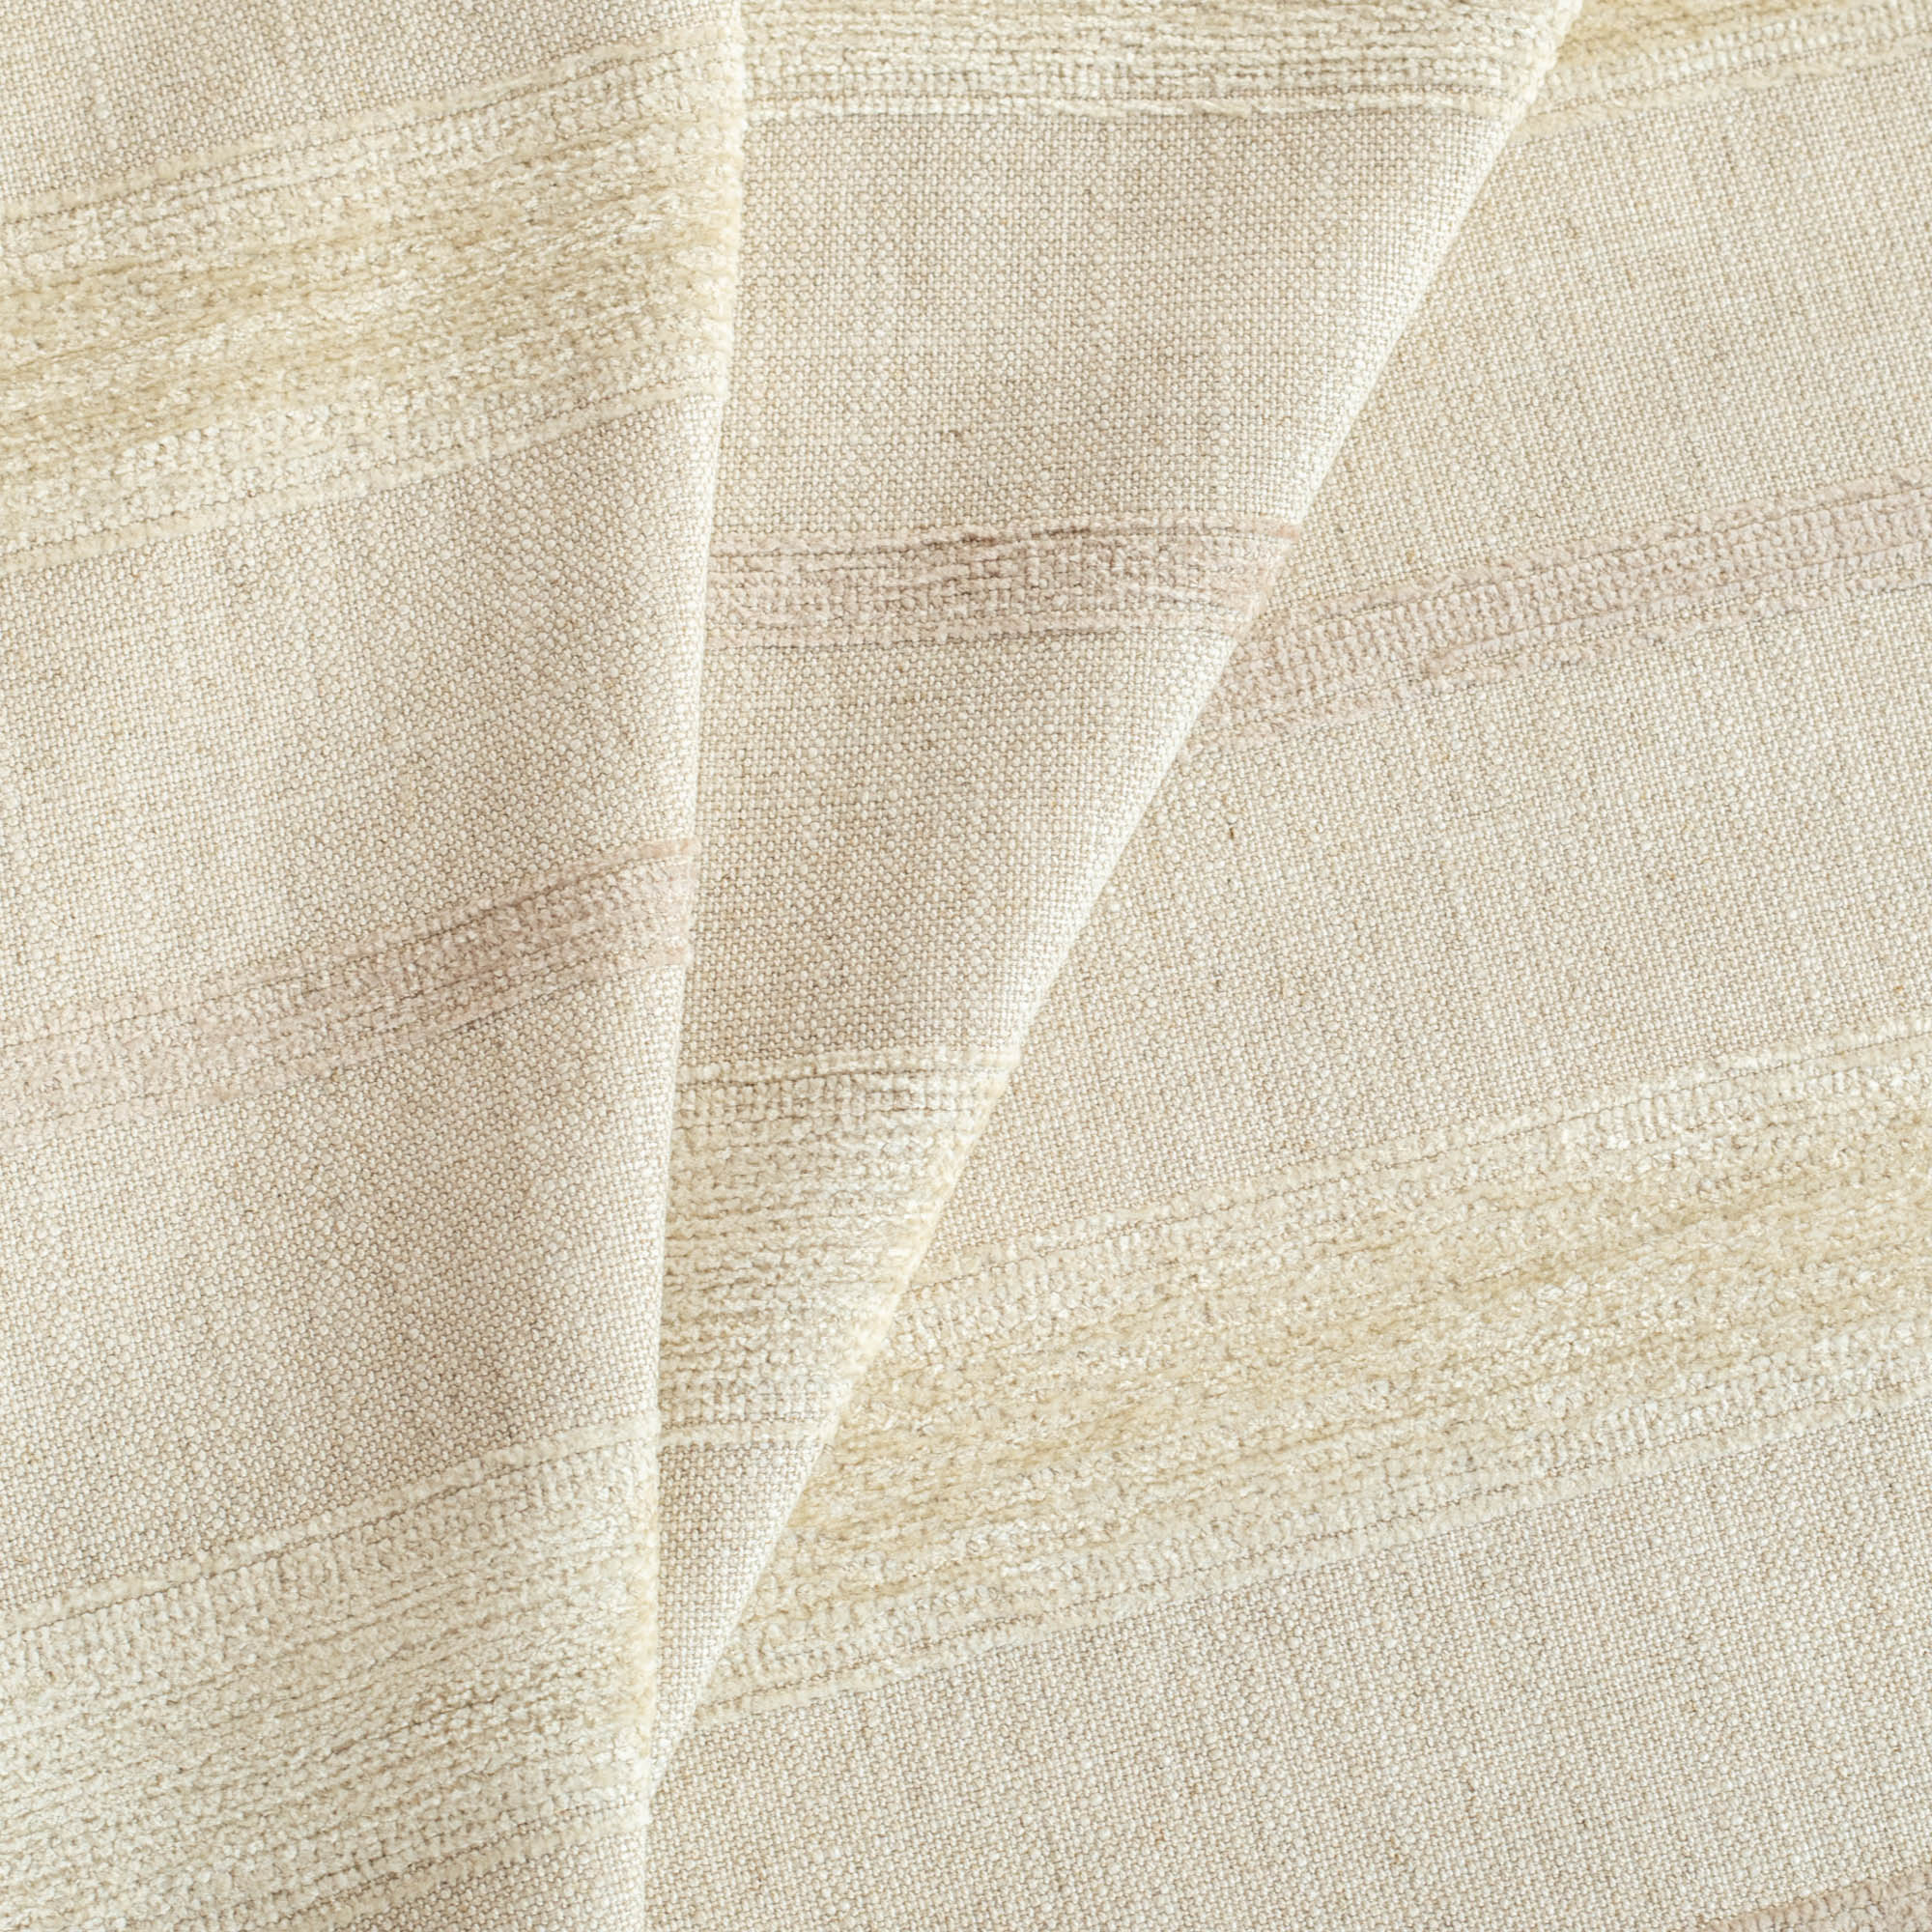 Softened Pure Linen Fabric, White Beige Striped Linen Fabric, Organic Pure  Flax Fabric, Rustic Vintage Striped Linen by the Meter, 290 GSM 